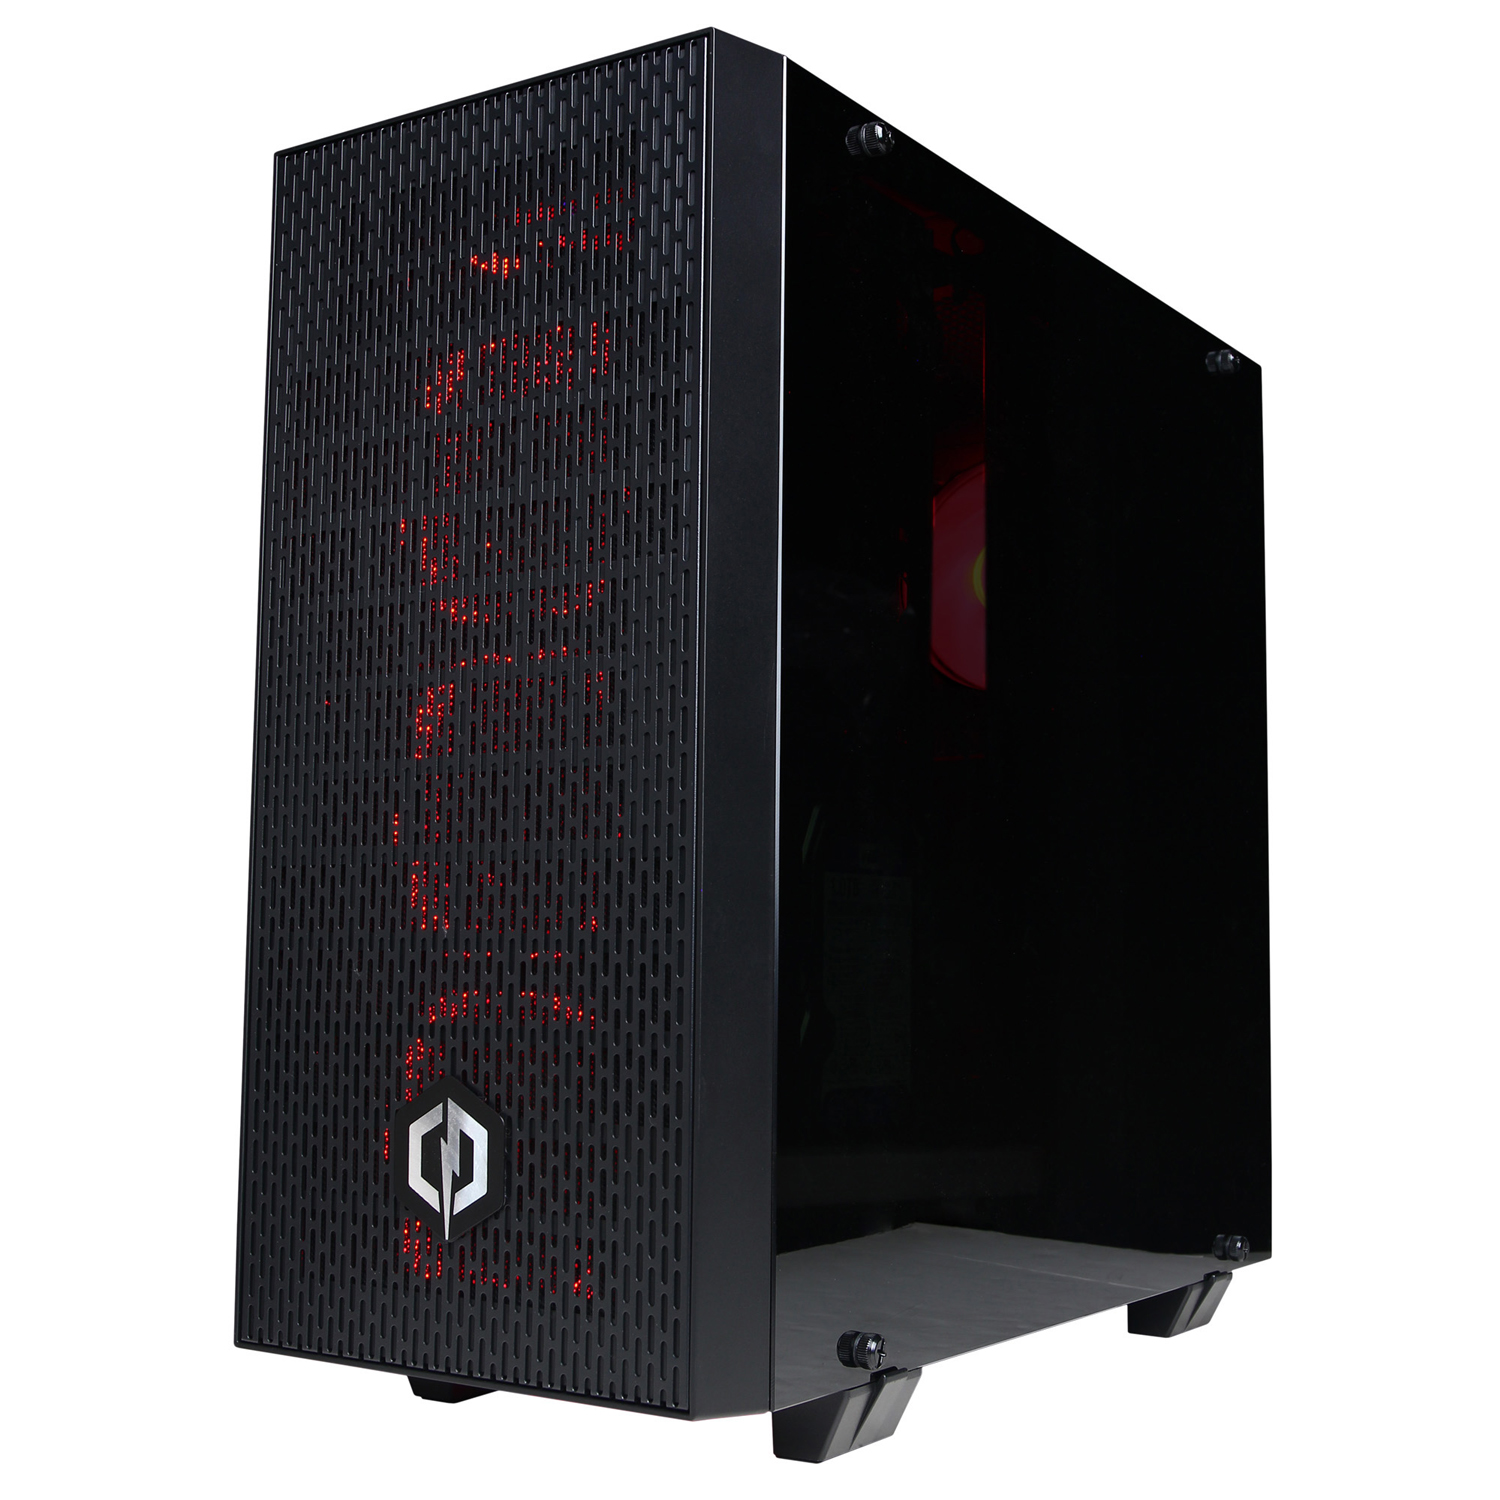 CYBERPOWERPC Gamer Master GMA6400CPG w/ AMD Ryzen 7 2700X Processor, NVIDIA GeForce GTX 1070 Ti Graphics, 16GB Memory, 240GB SSD, 2TB Hard Drive and Windows 10 Home (Monitor Not Included) - image 4 of 56